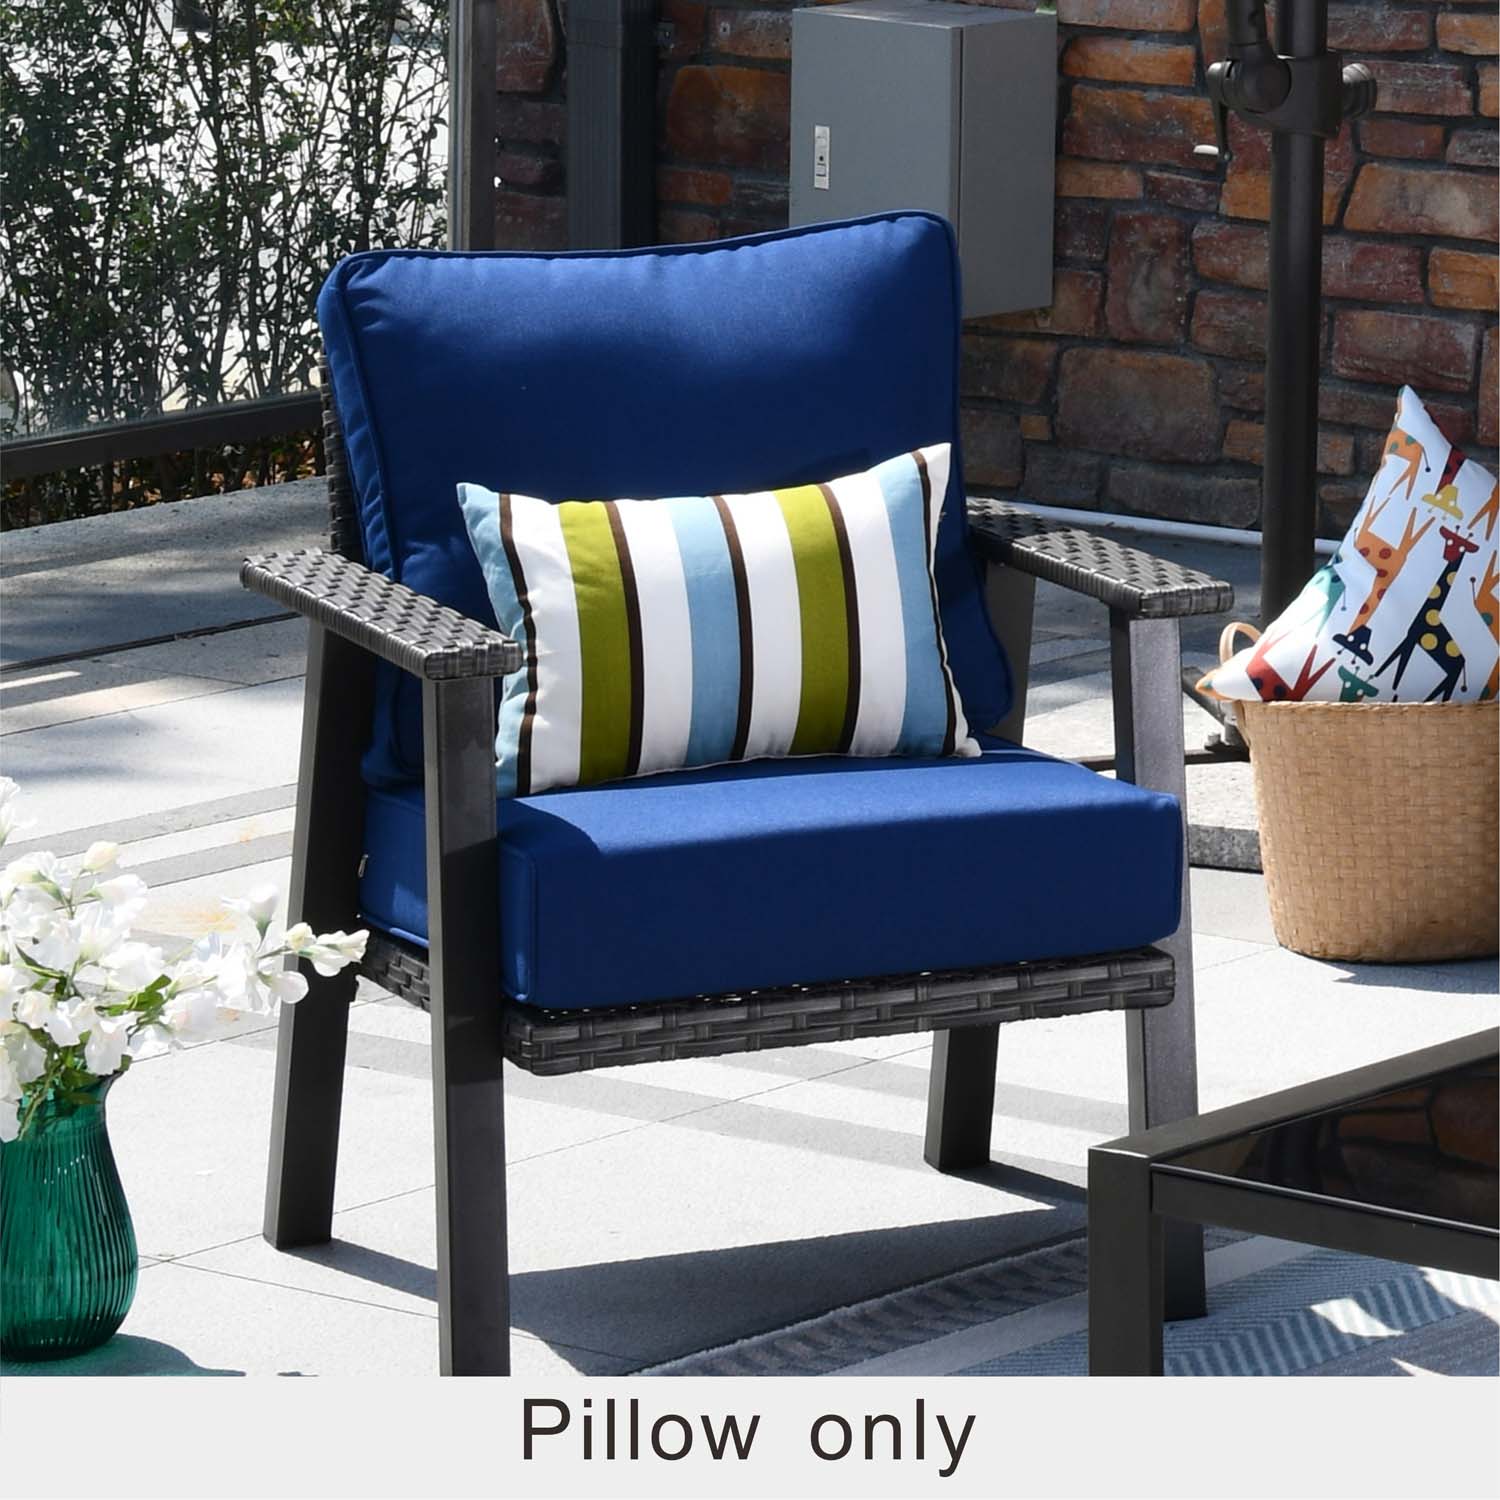 Enipate Inserts Included Outdoor Throw Pillows Set of 2 Water Resistant Navy Toss Pillows for Patio Furniture Decor 18x18 in